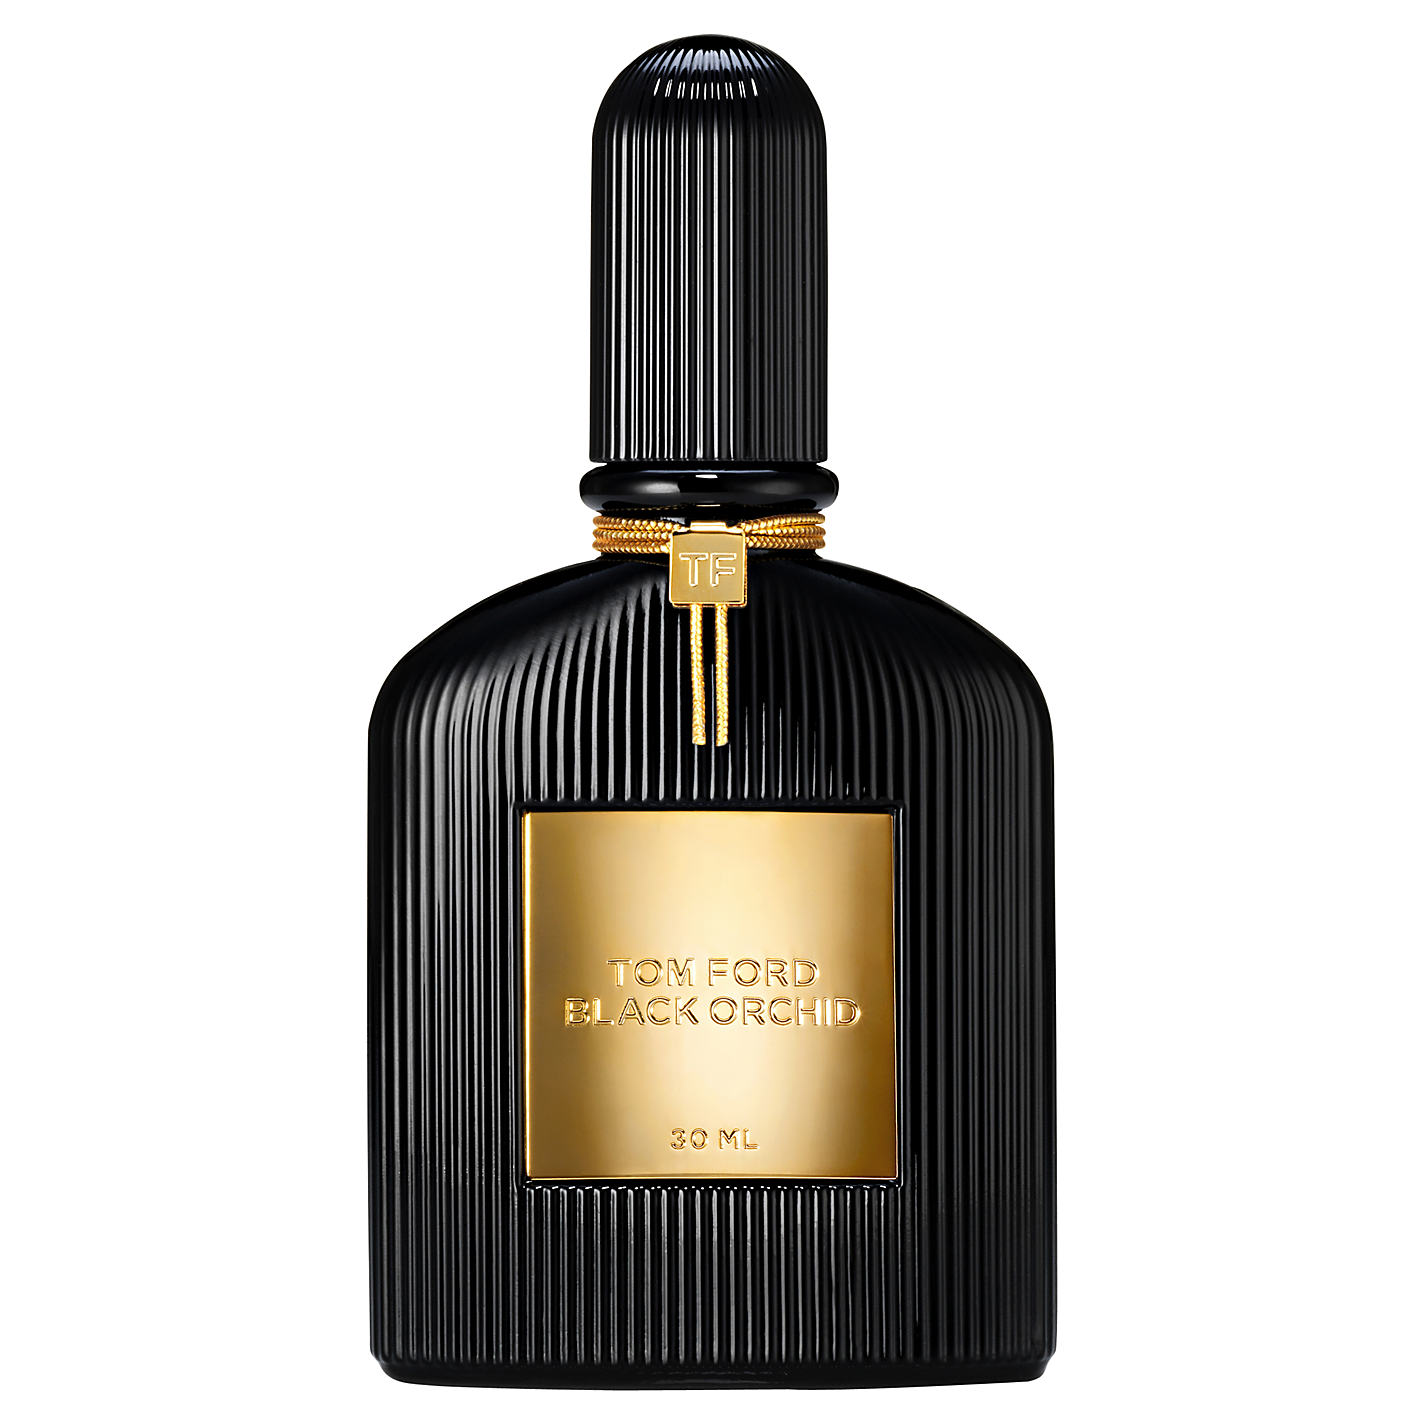 TOMFORD BLACK ORCHID